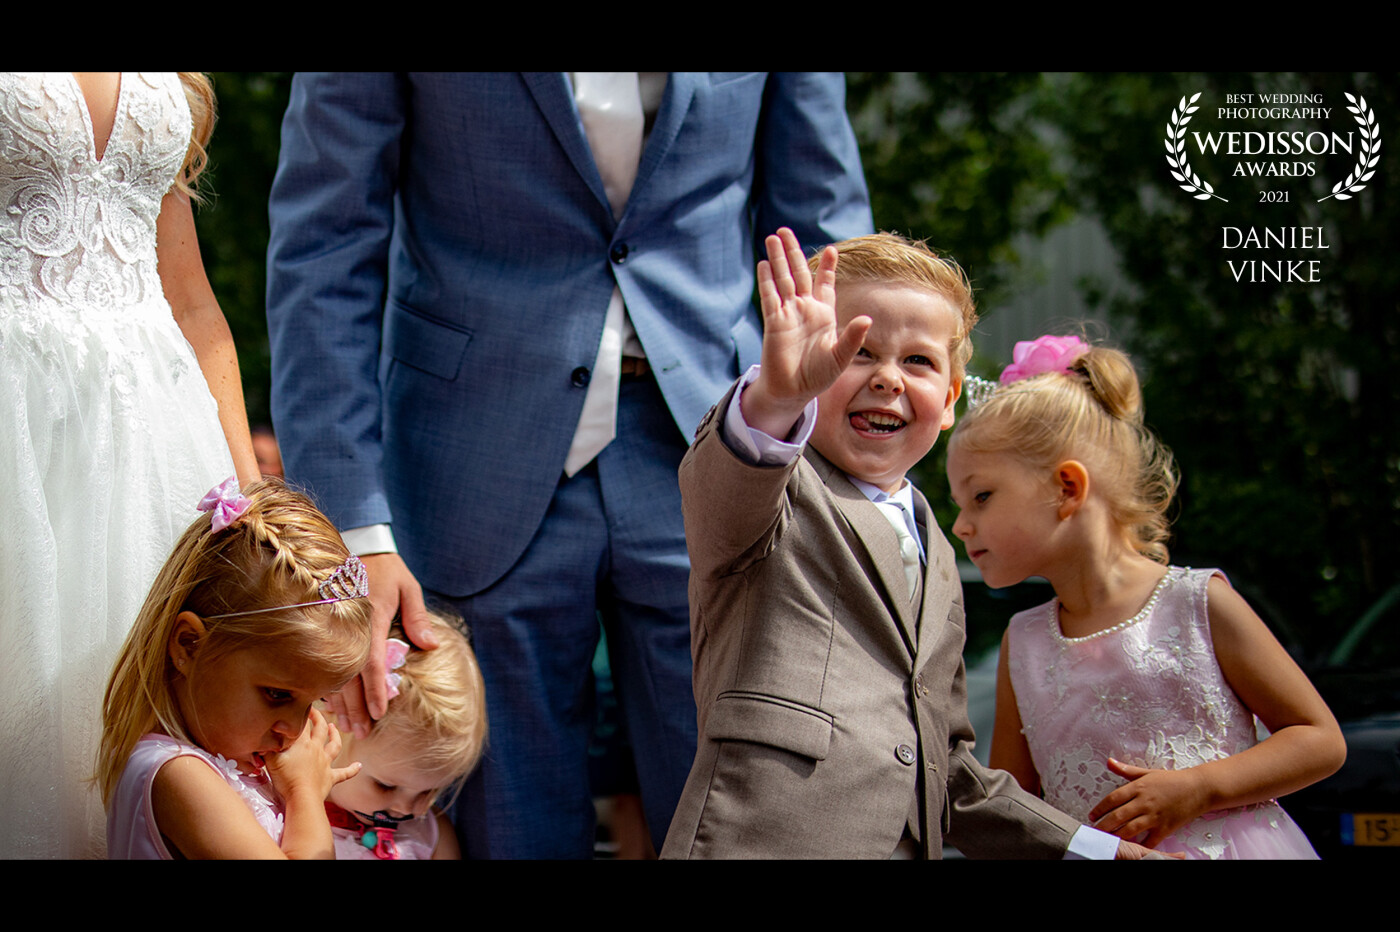 It's always a big moment when the bride and groom meet their wedding guests for the first time. This time their son took over the arrival on the wedding location. He owned this moment like a boss!